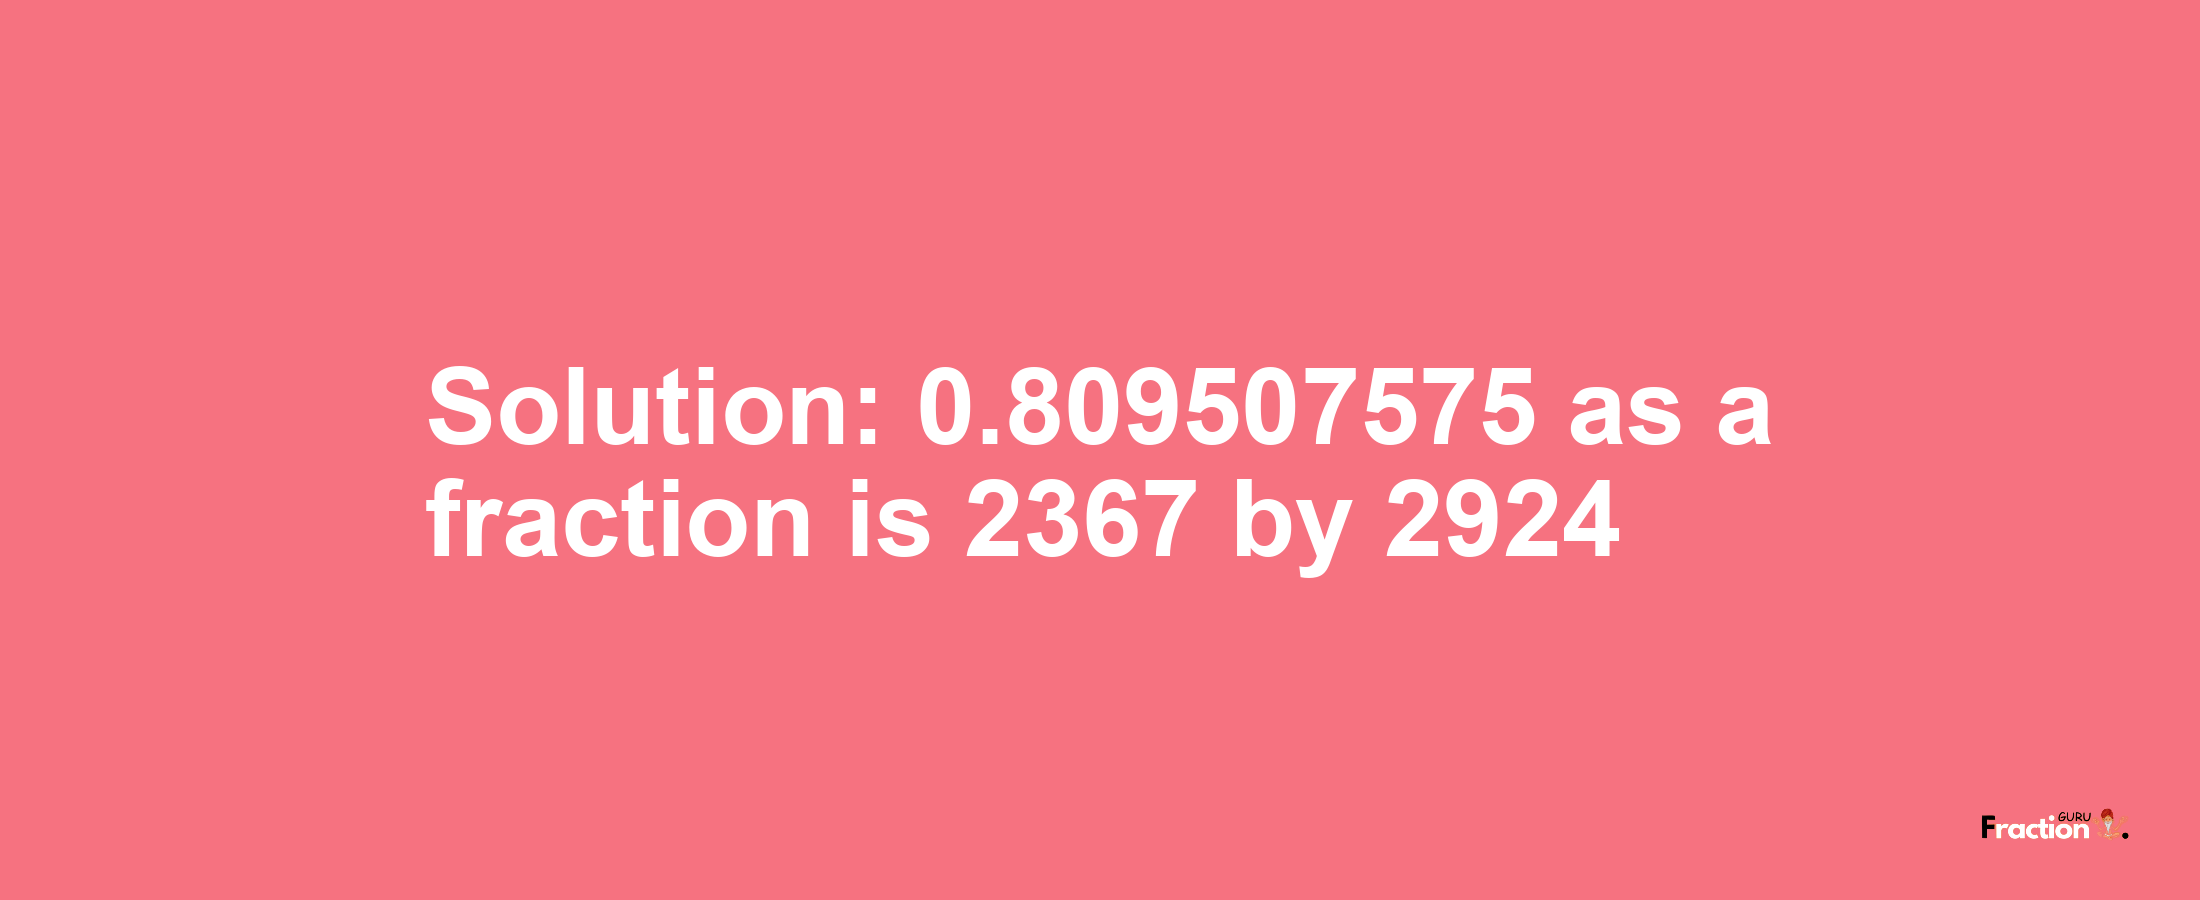 Solution:0.809507575 as a fraction is 2367/2924